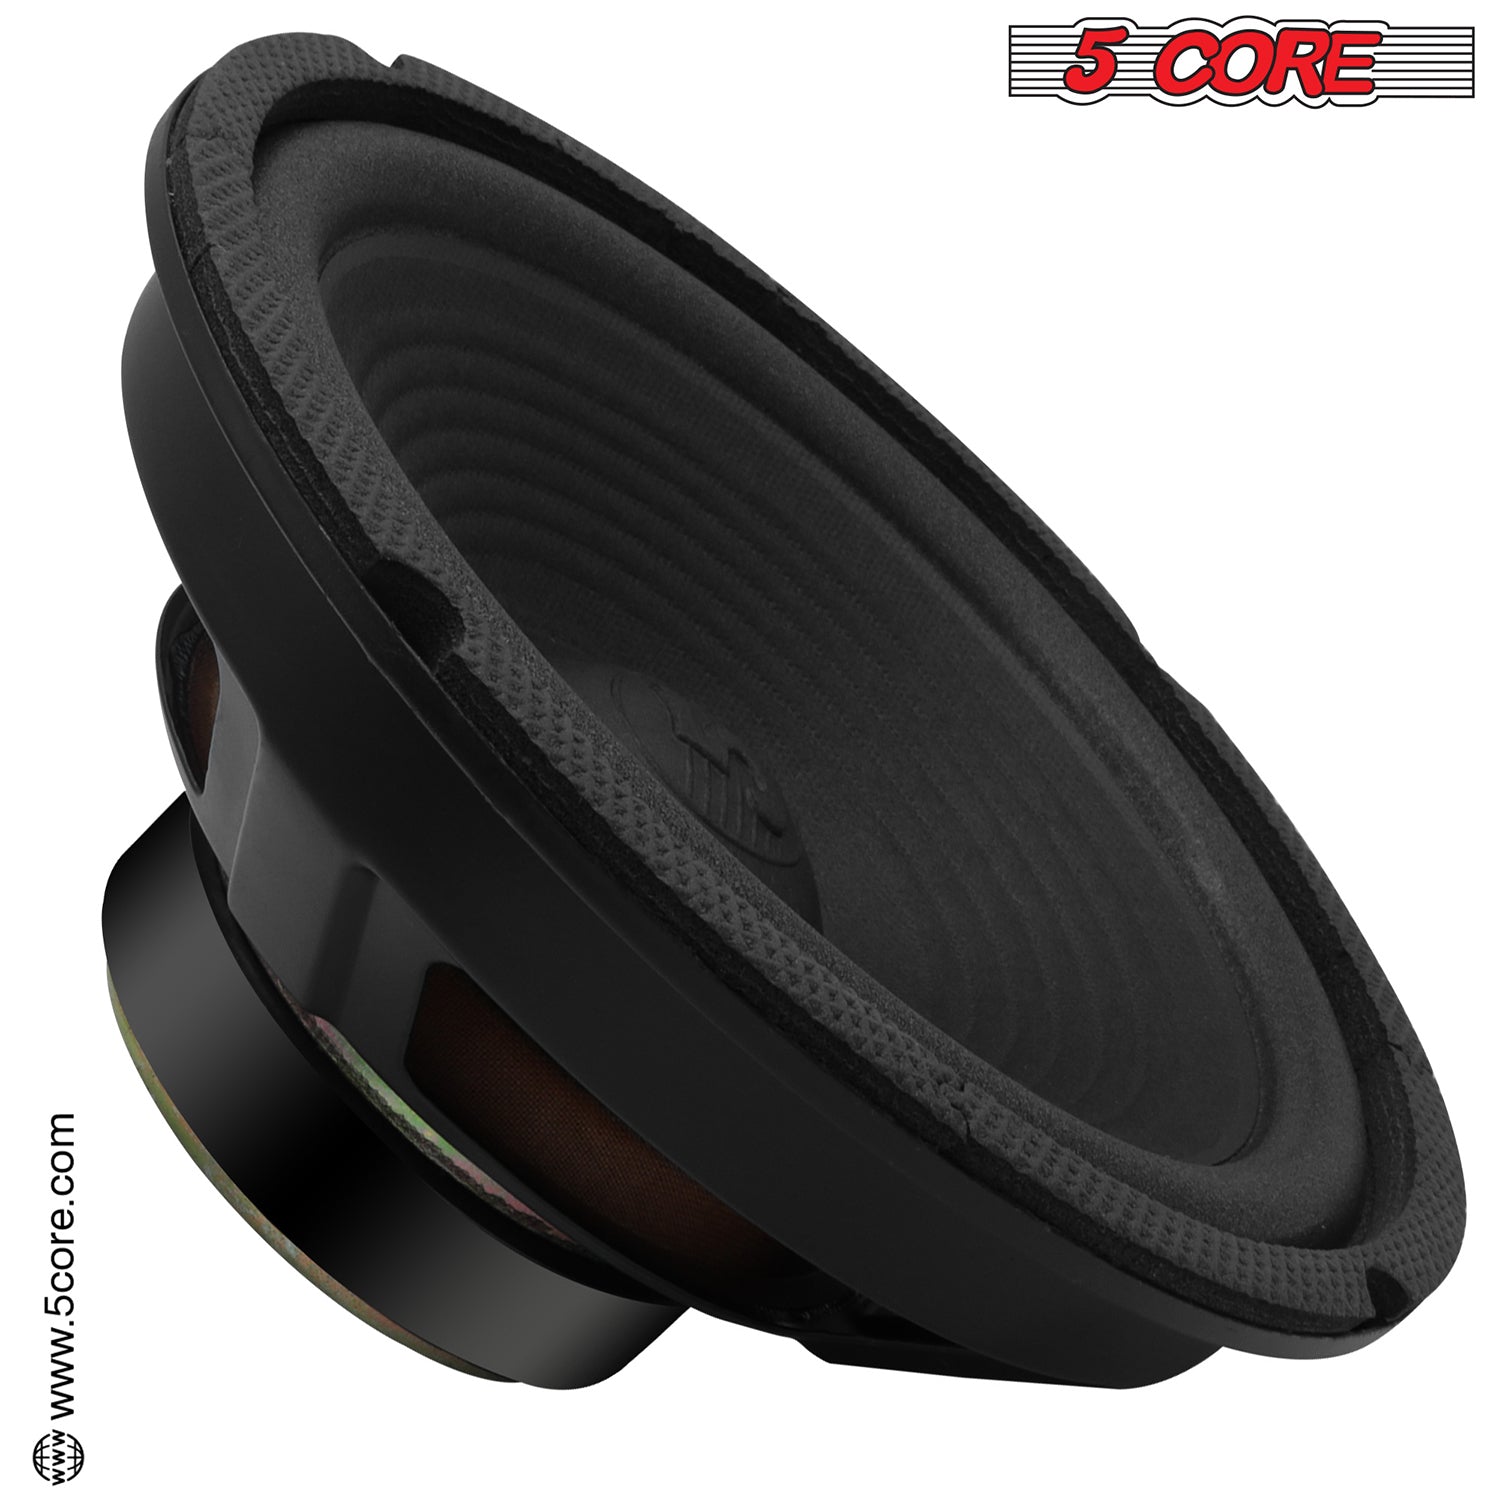 5 Core 8 Inch Subwoofer Car Audio 500W PMPO 4 Ohm Bass Sub Woofer Replacement Speaker w 0.81" Voice Coil